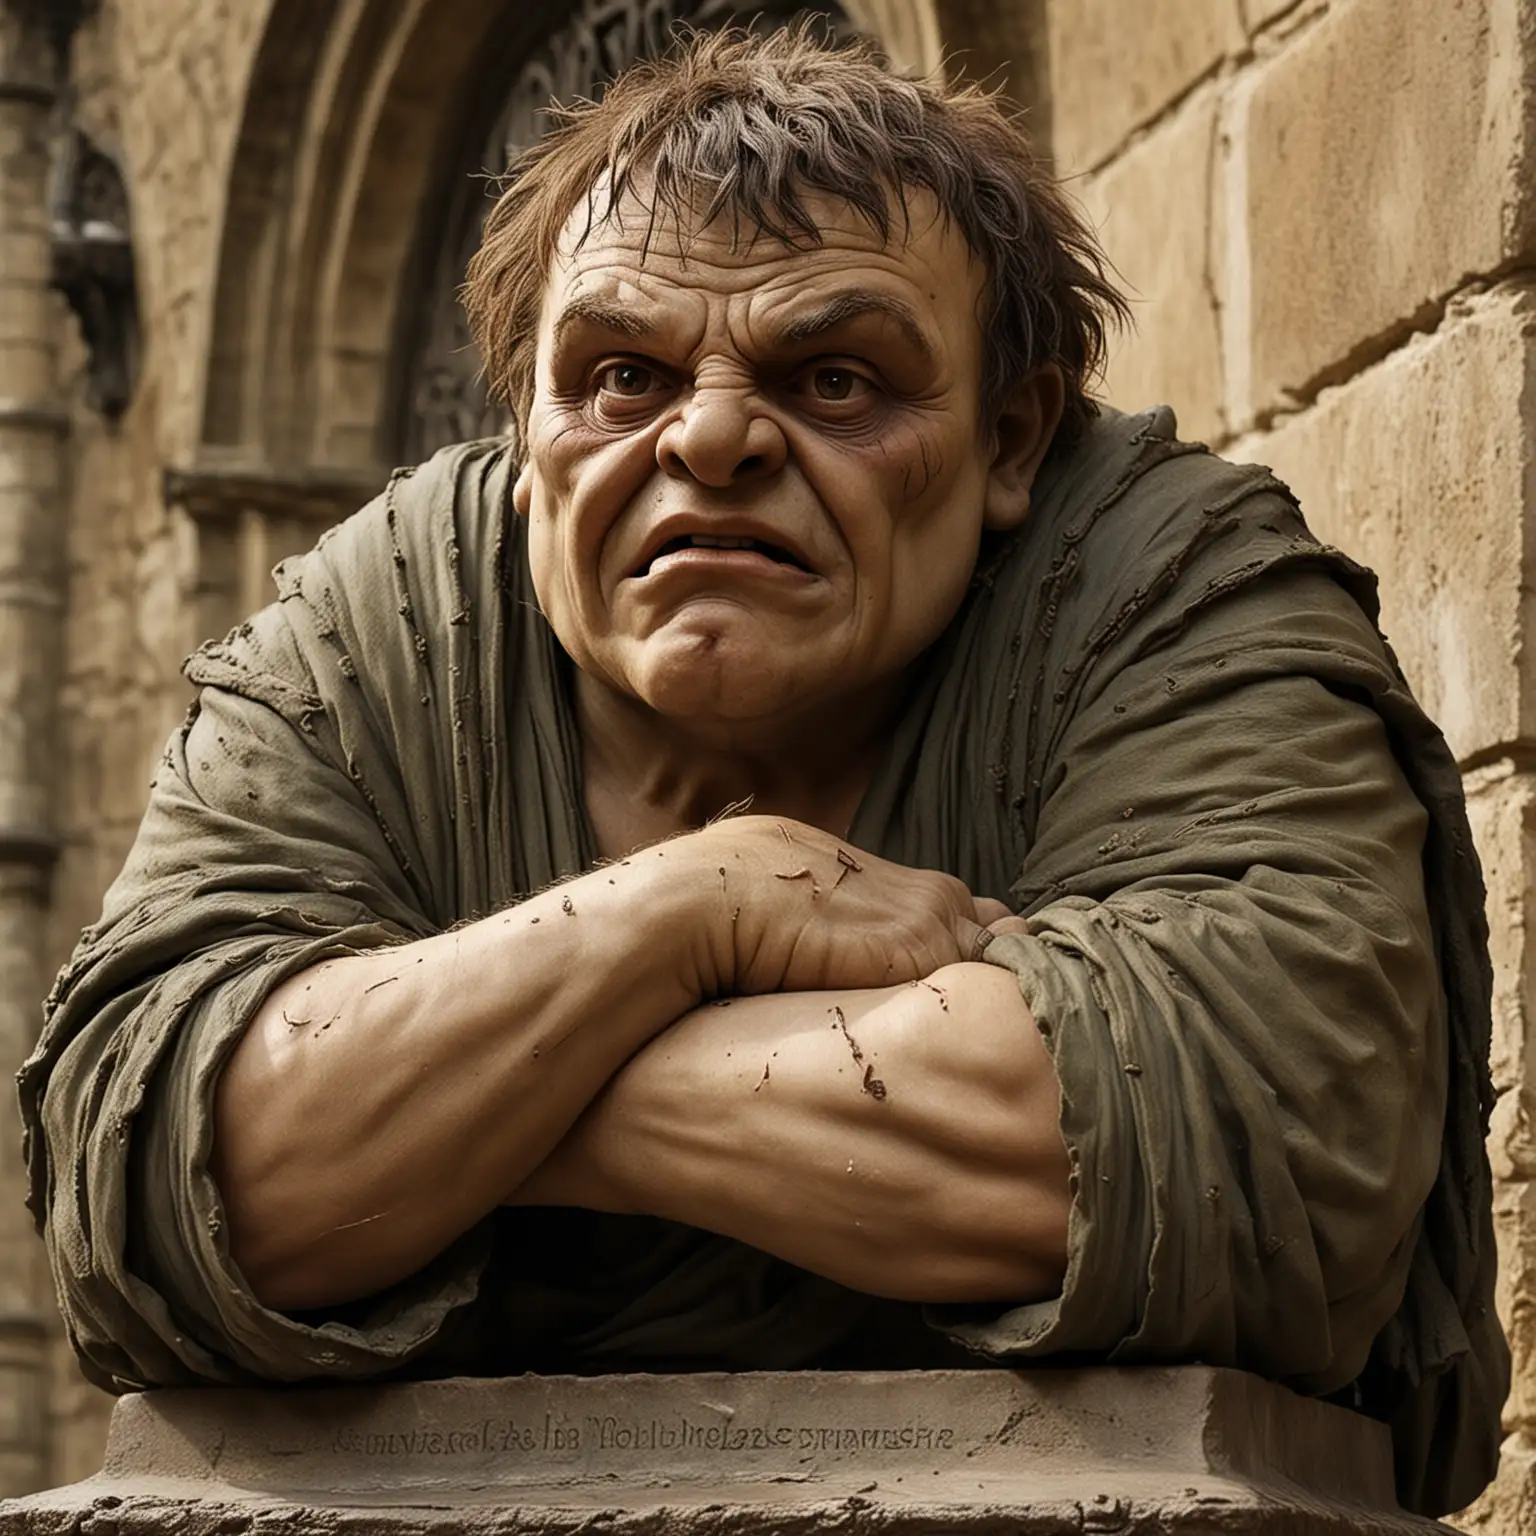 Quasimodo, the central figure of Victor Hugo's 'The Hunchback of Notre-Dame,' is a striking character whose physical appearance is marked by his deformities...